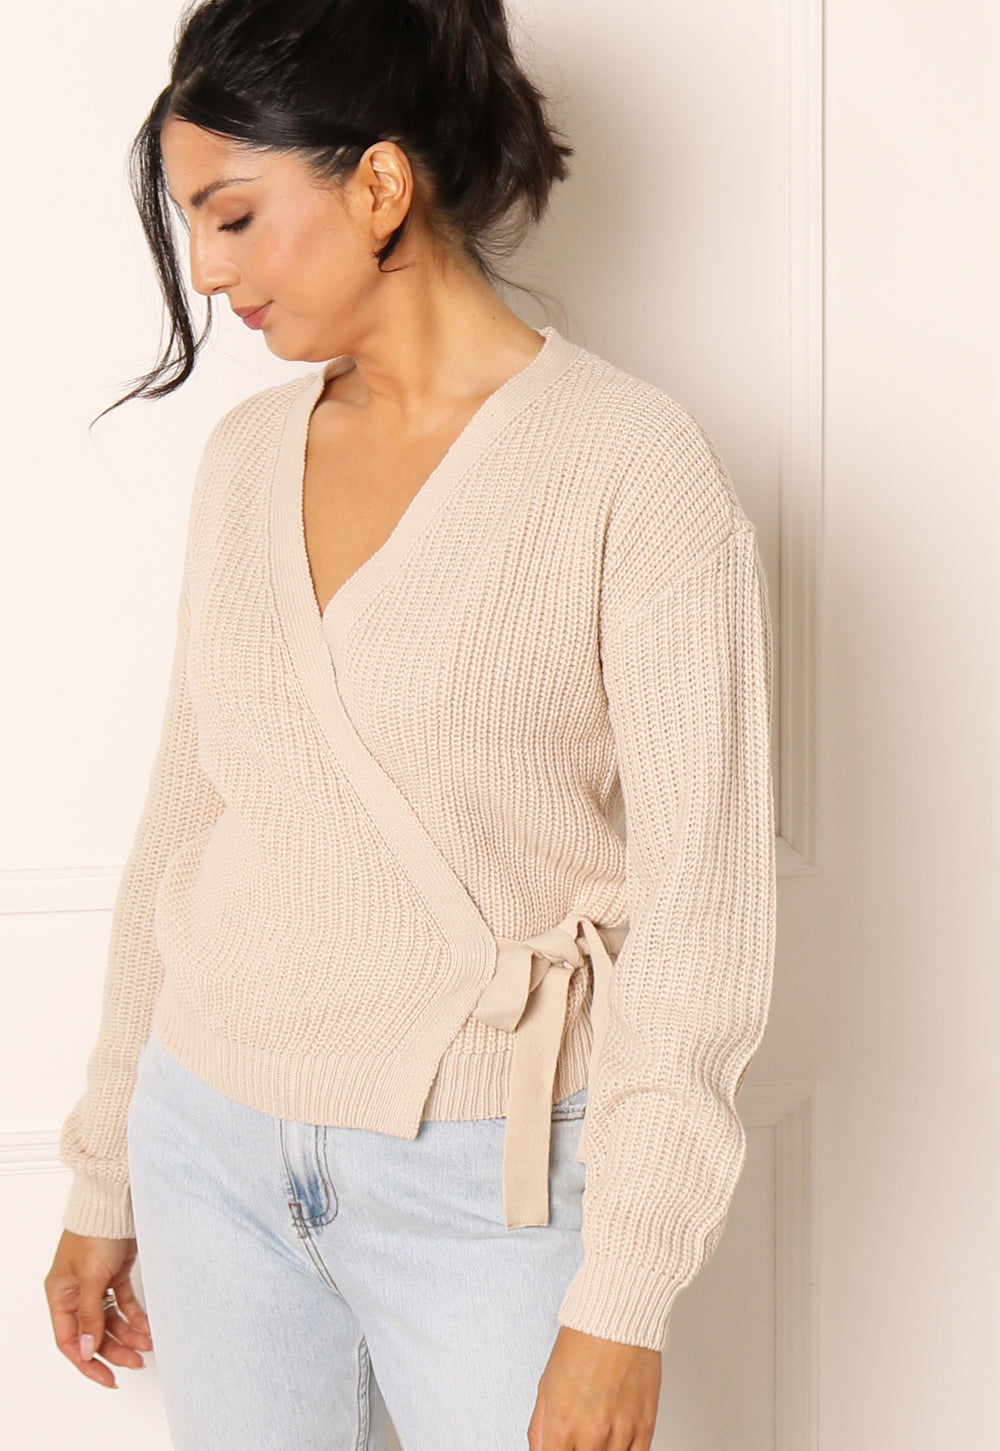 VERO MODA Lea Chunky Knit Wrap Over Cardigan in Soft Beige - One Nation Clothing